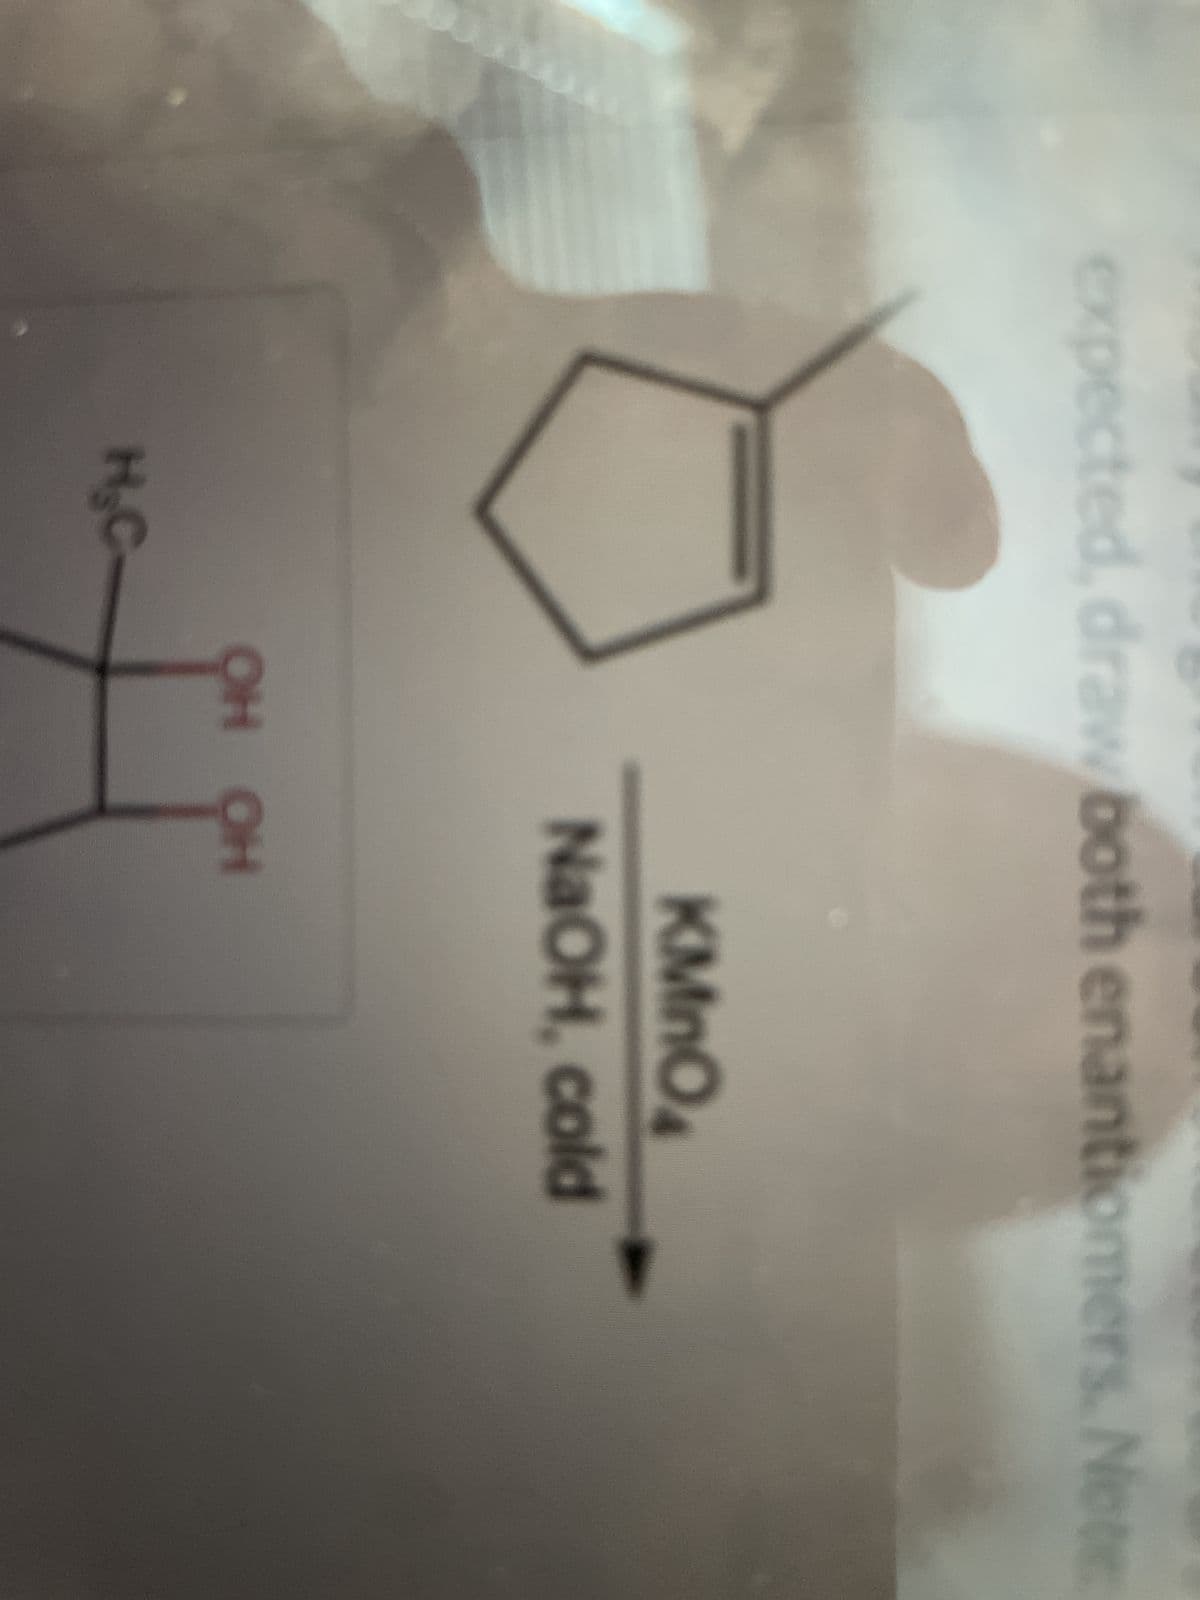 expected, draw both enantiomers. Note
H₂C
KMnO4
NaOH, cold
OH OH